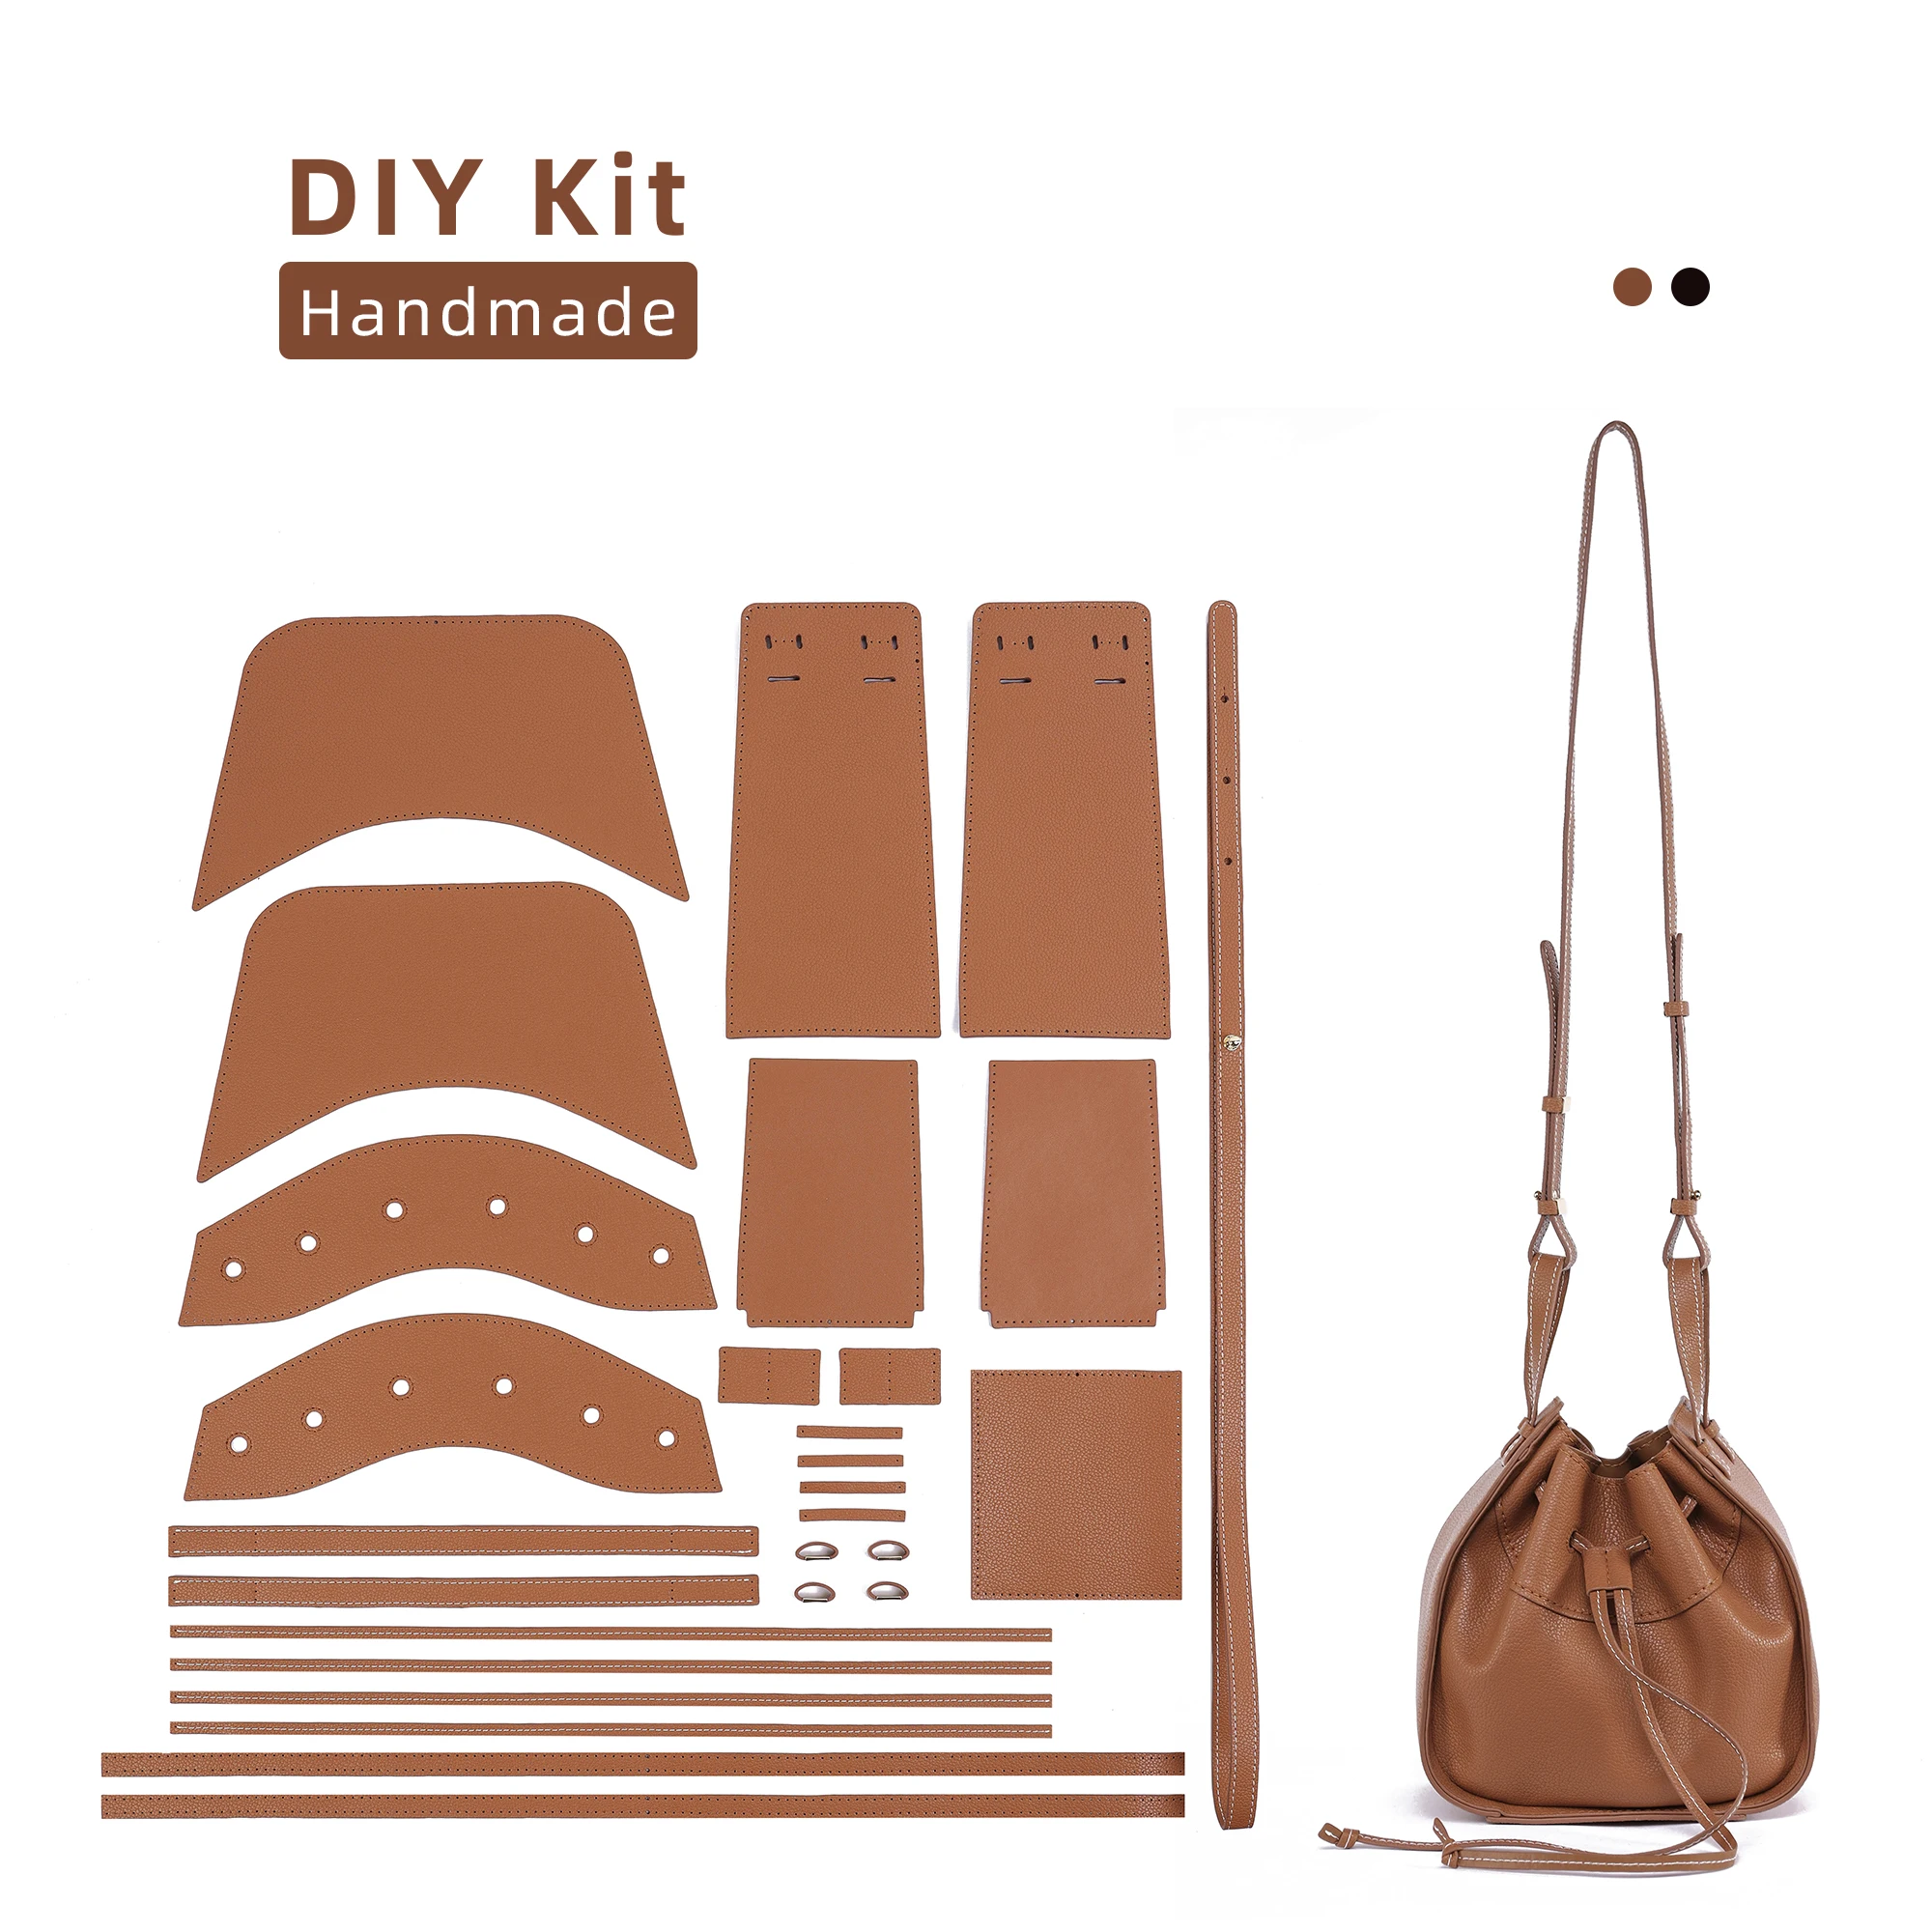 

Luxury DIY Leather Bucket Bag Crafts Kits Handmade Ladies Bag Make Your Own Hand-Stitched Women Shoulder Bags